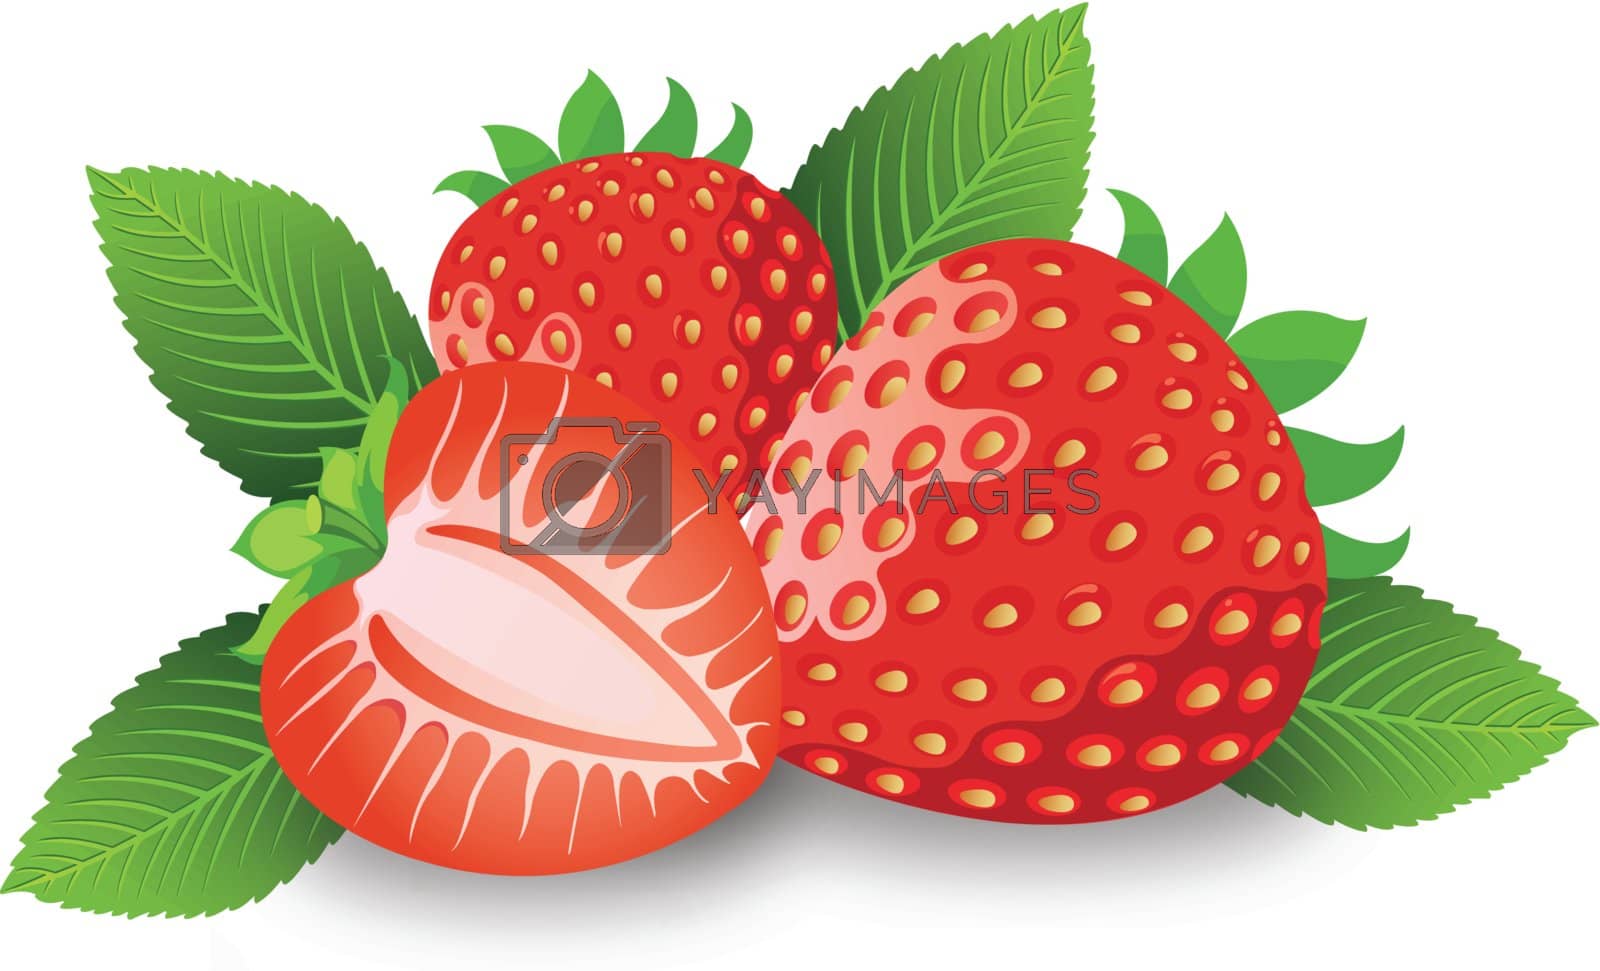 Royalty free image of Strawberry, illustration by Morphart